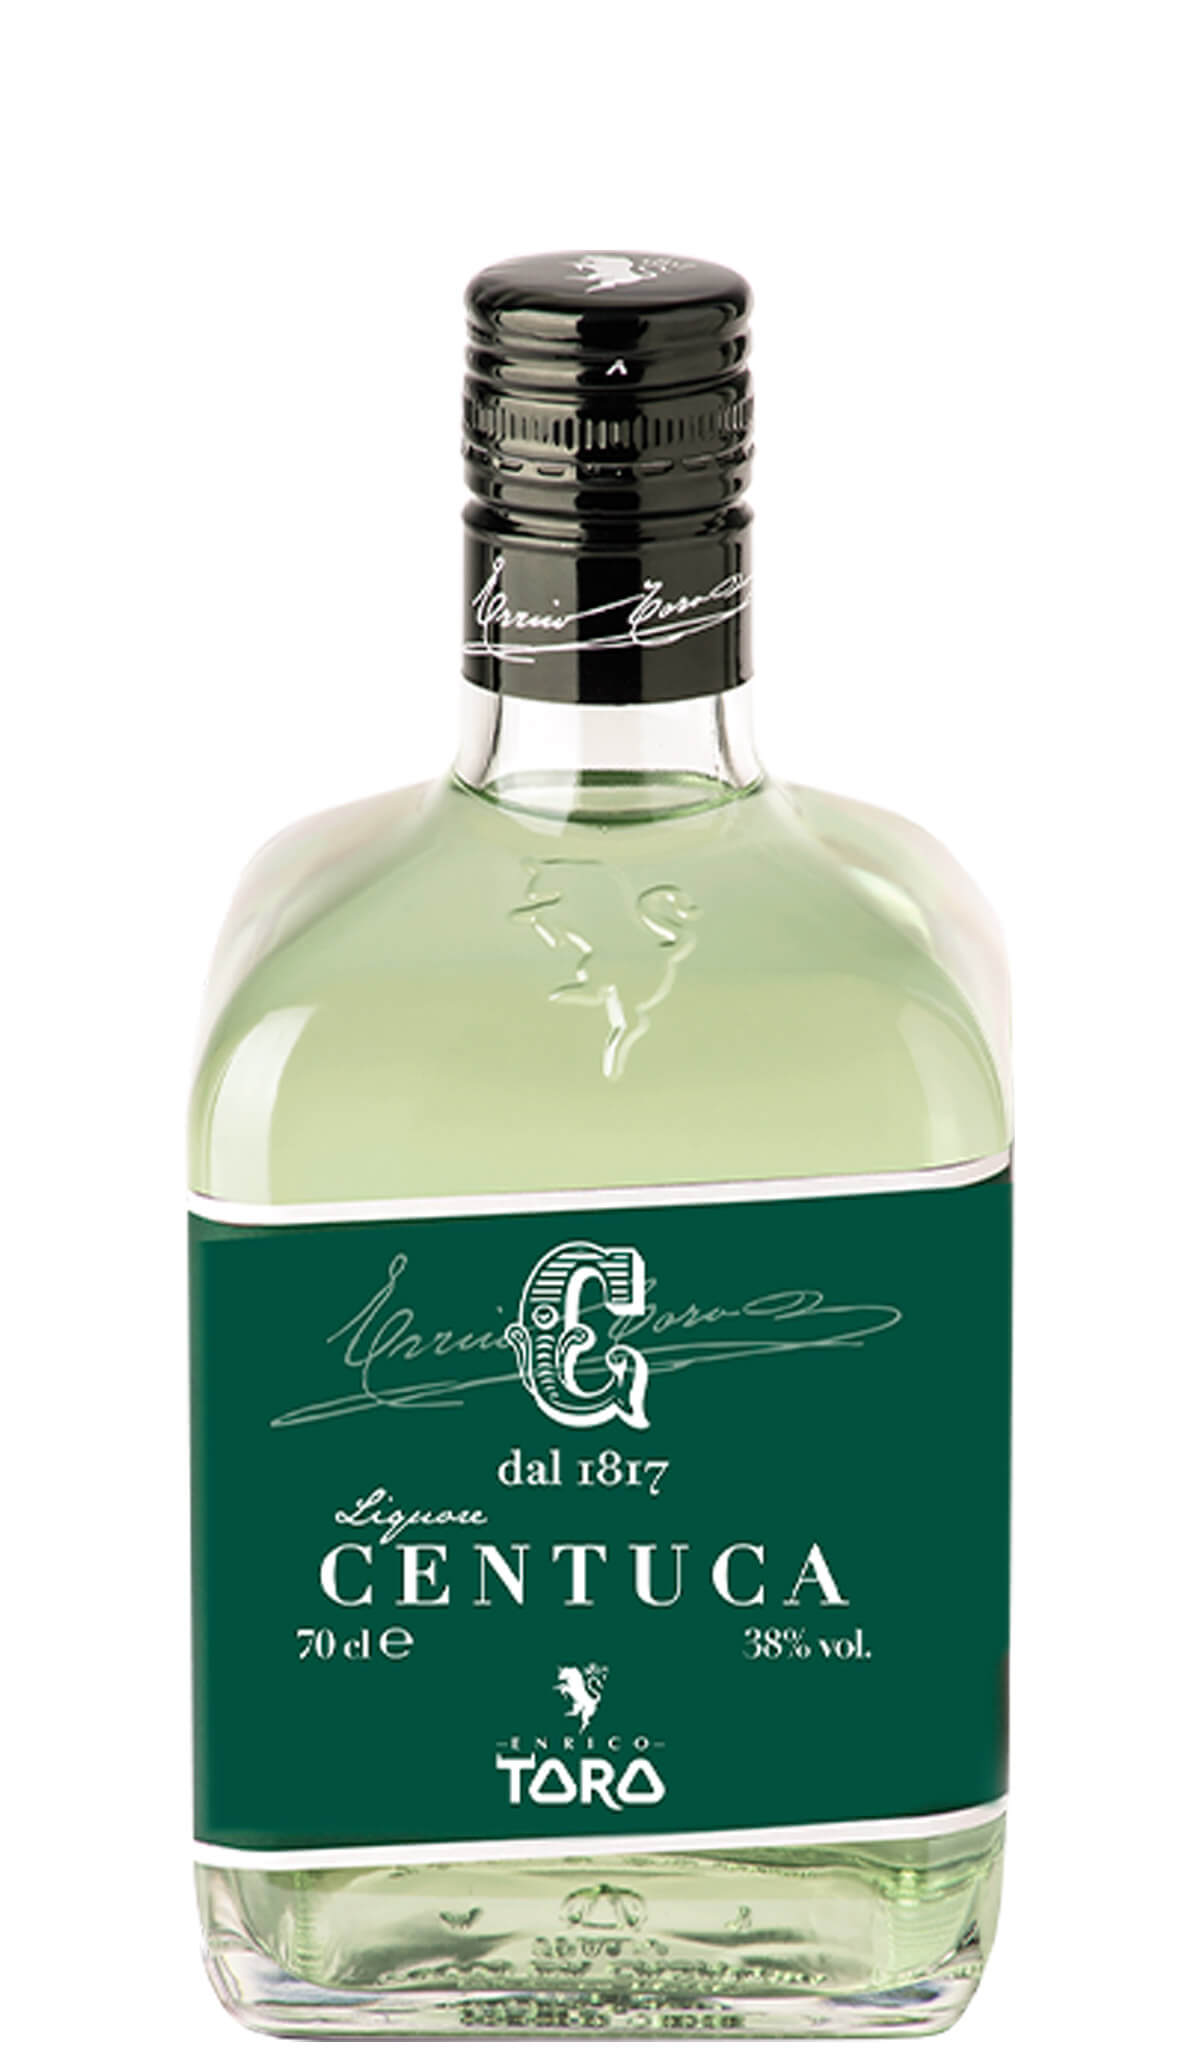 Find out more, explore the range and buy Enrico Toro Centucca Sambuca alla Centerba 700mL available online at Wine Sellers Direct - Australia's independent liquor specialists.